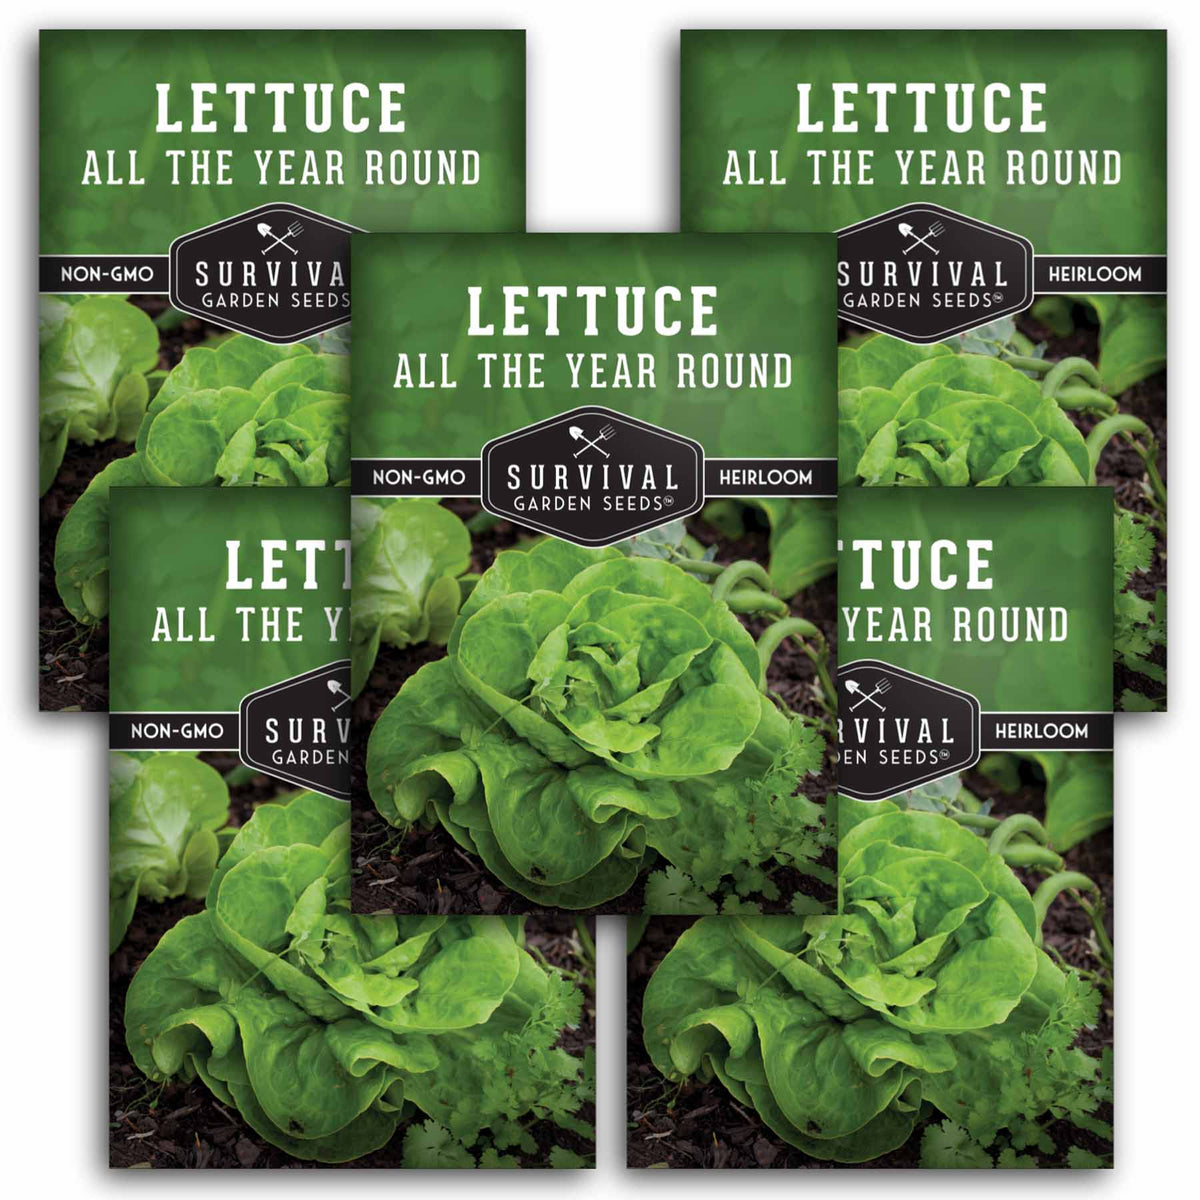 5 packets of All the Year Round Lettuce seeds